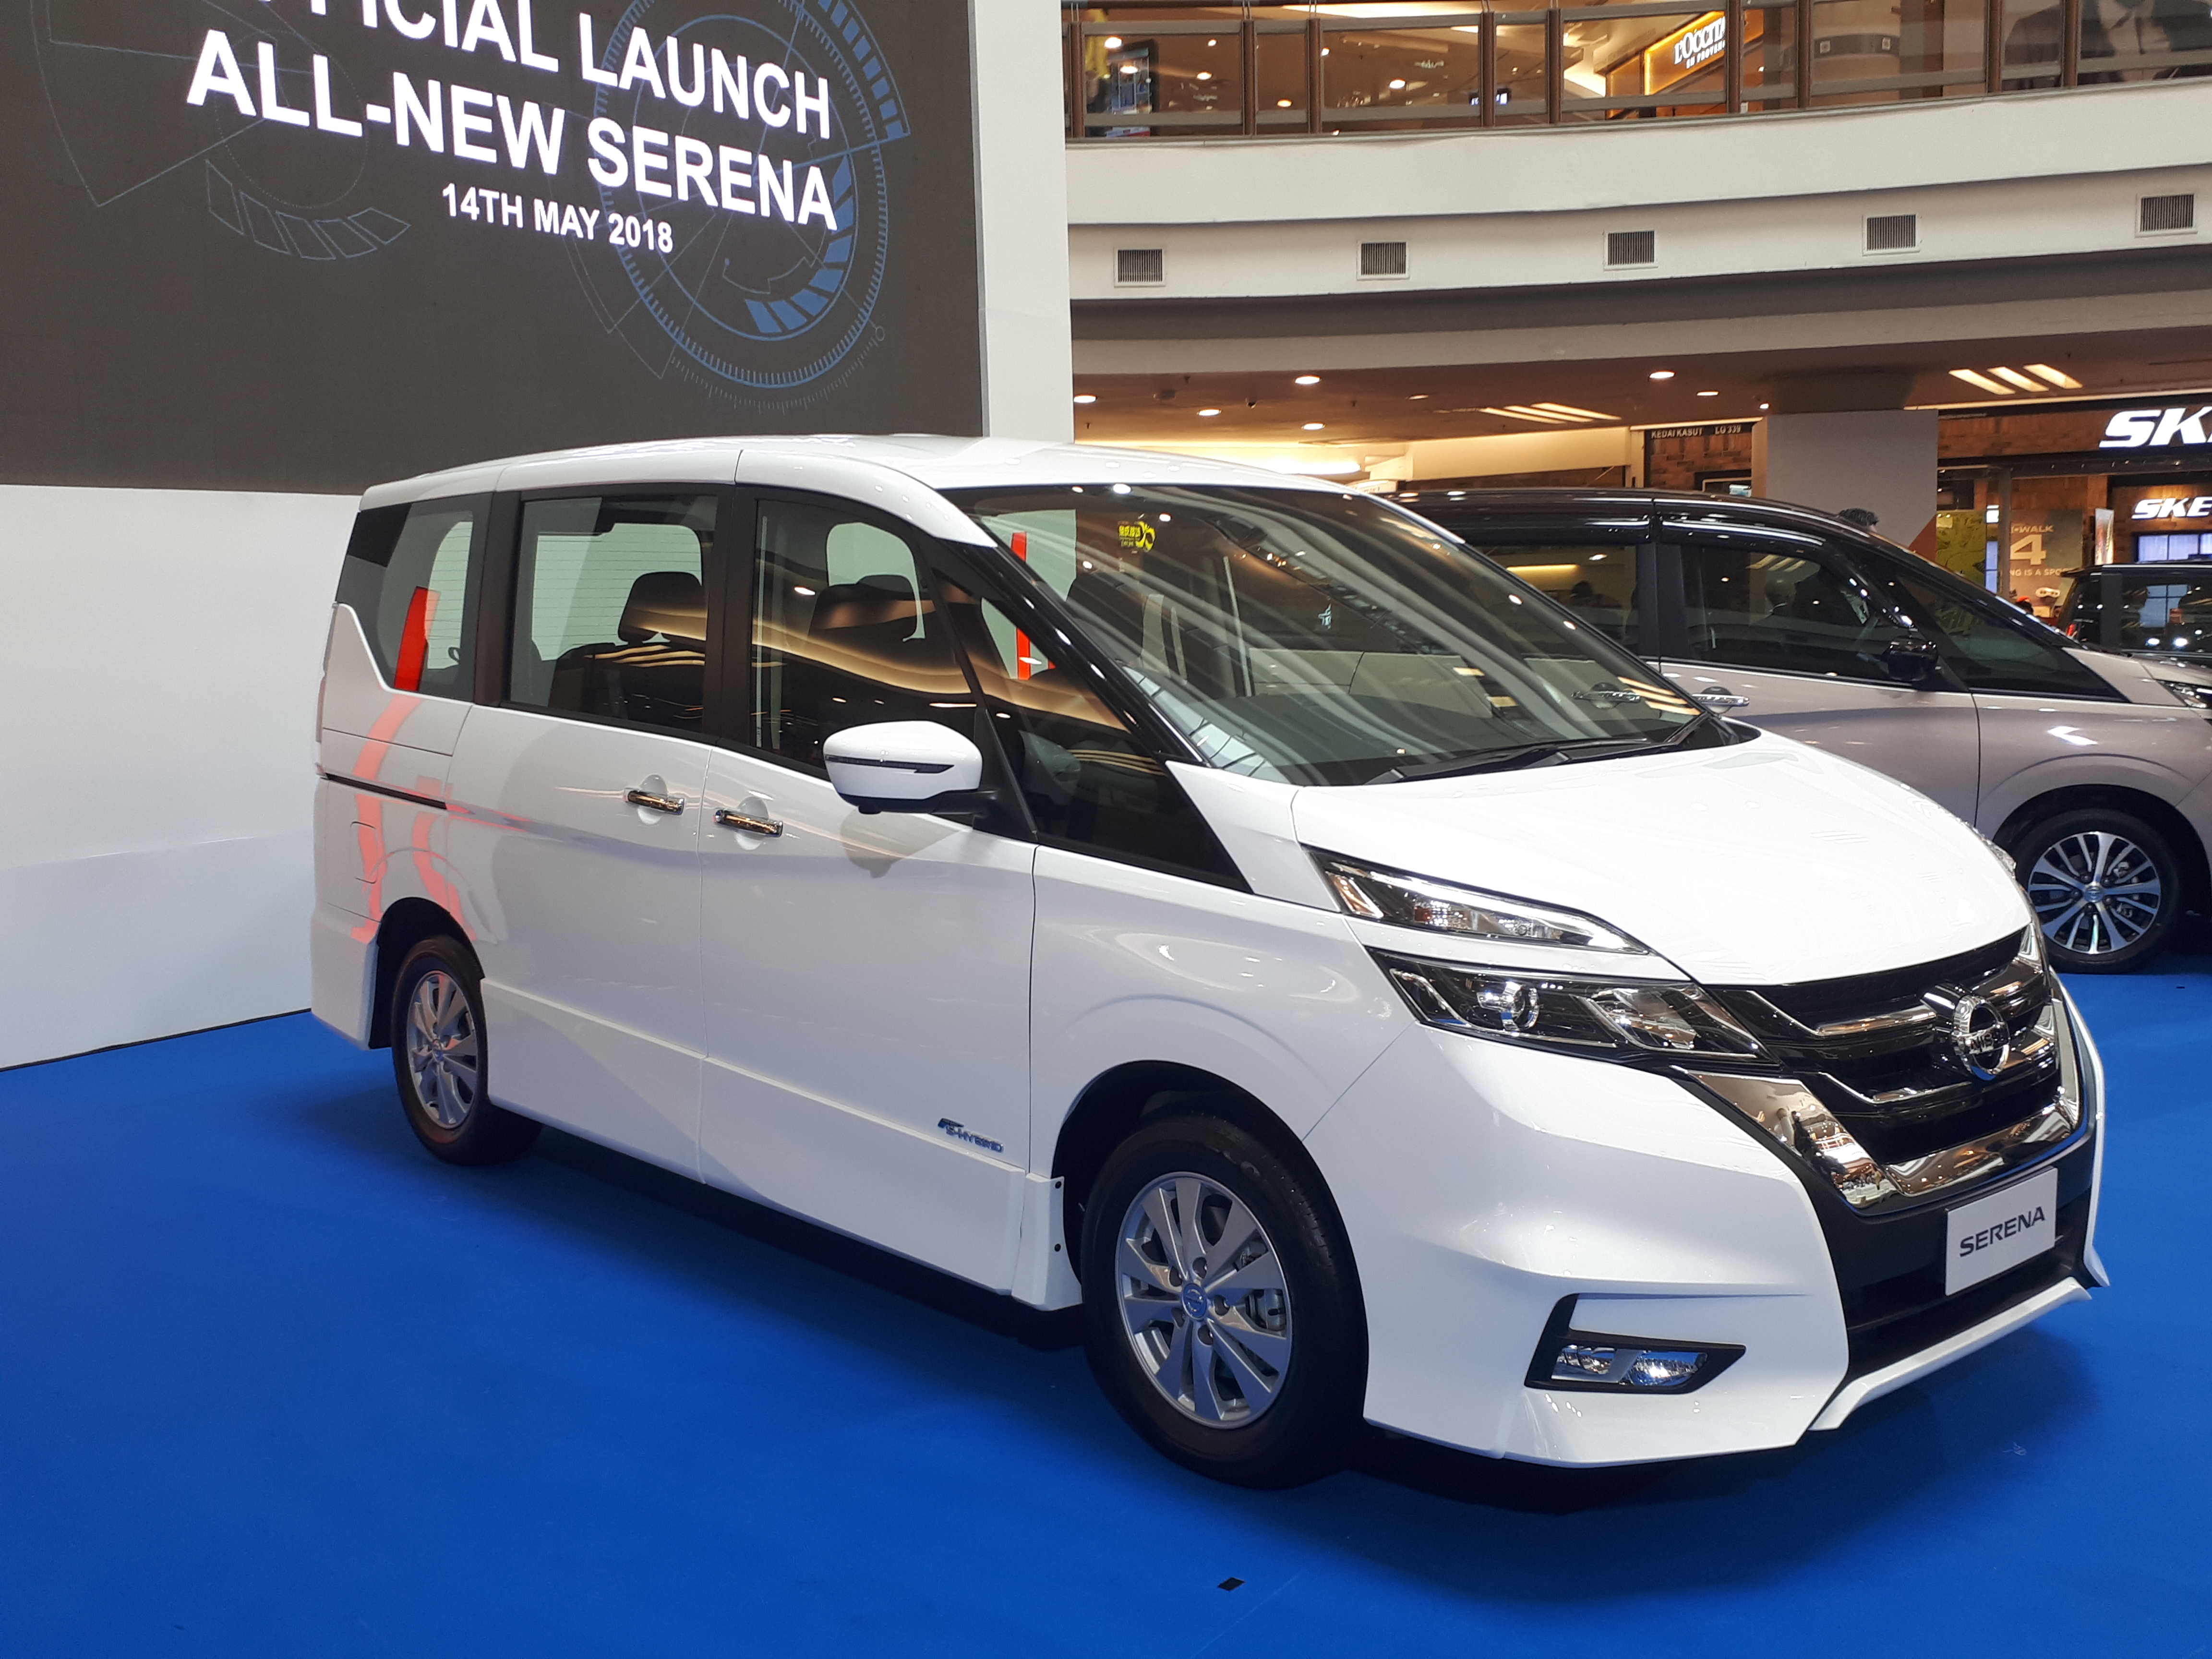 ETCM Launches New Nissan Serena SHybrid Priced At RM135